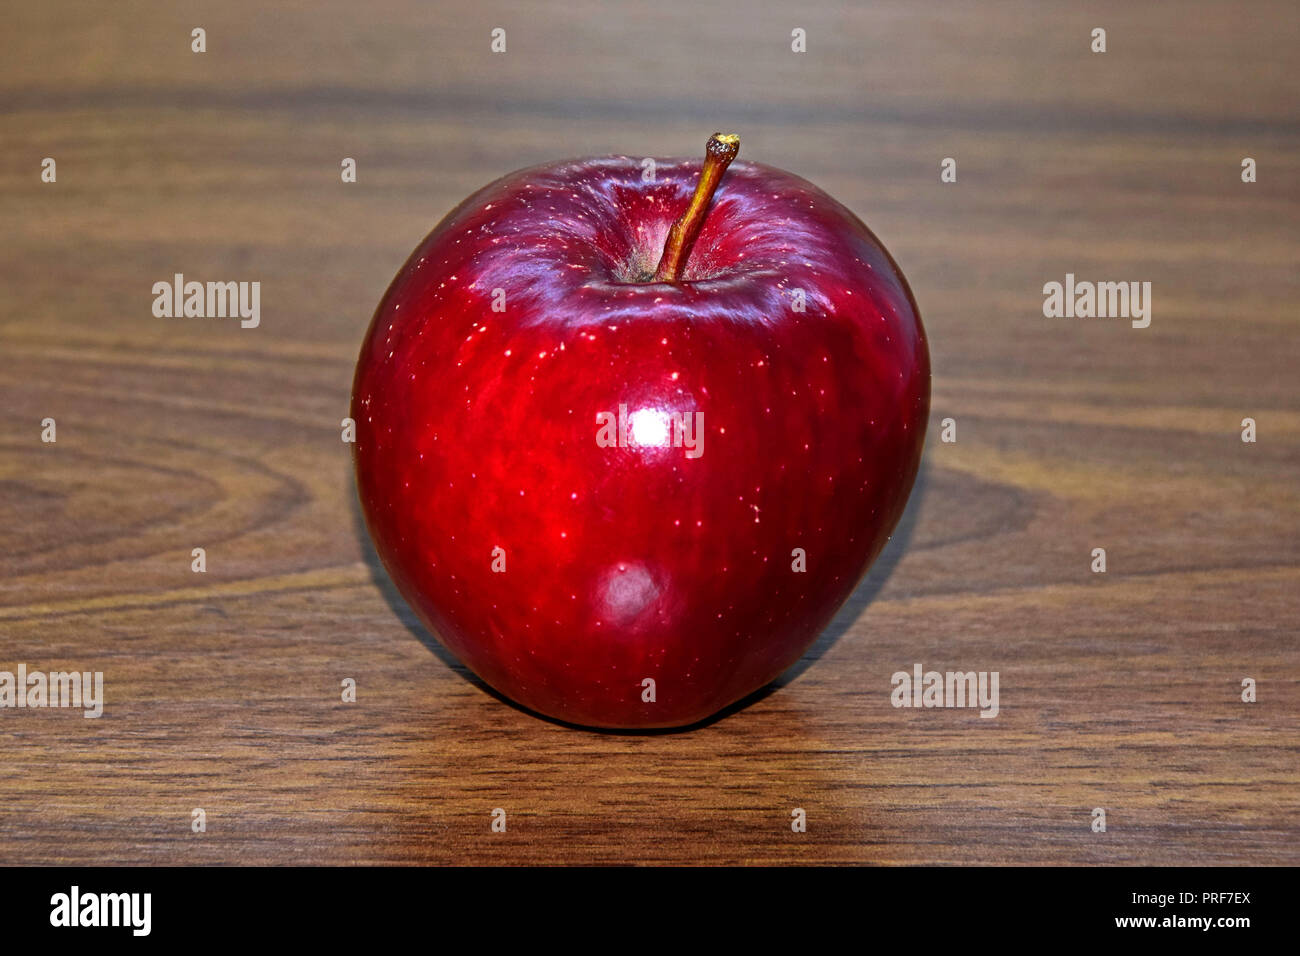 A shiny , ripe dark red apple with white spots lain on brown wooden desktop, in lateral close-up view Stock Photo